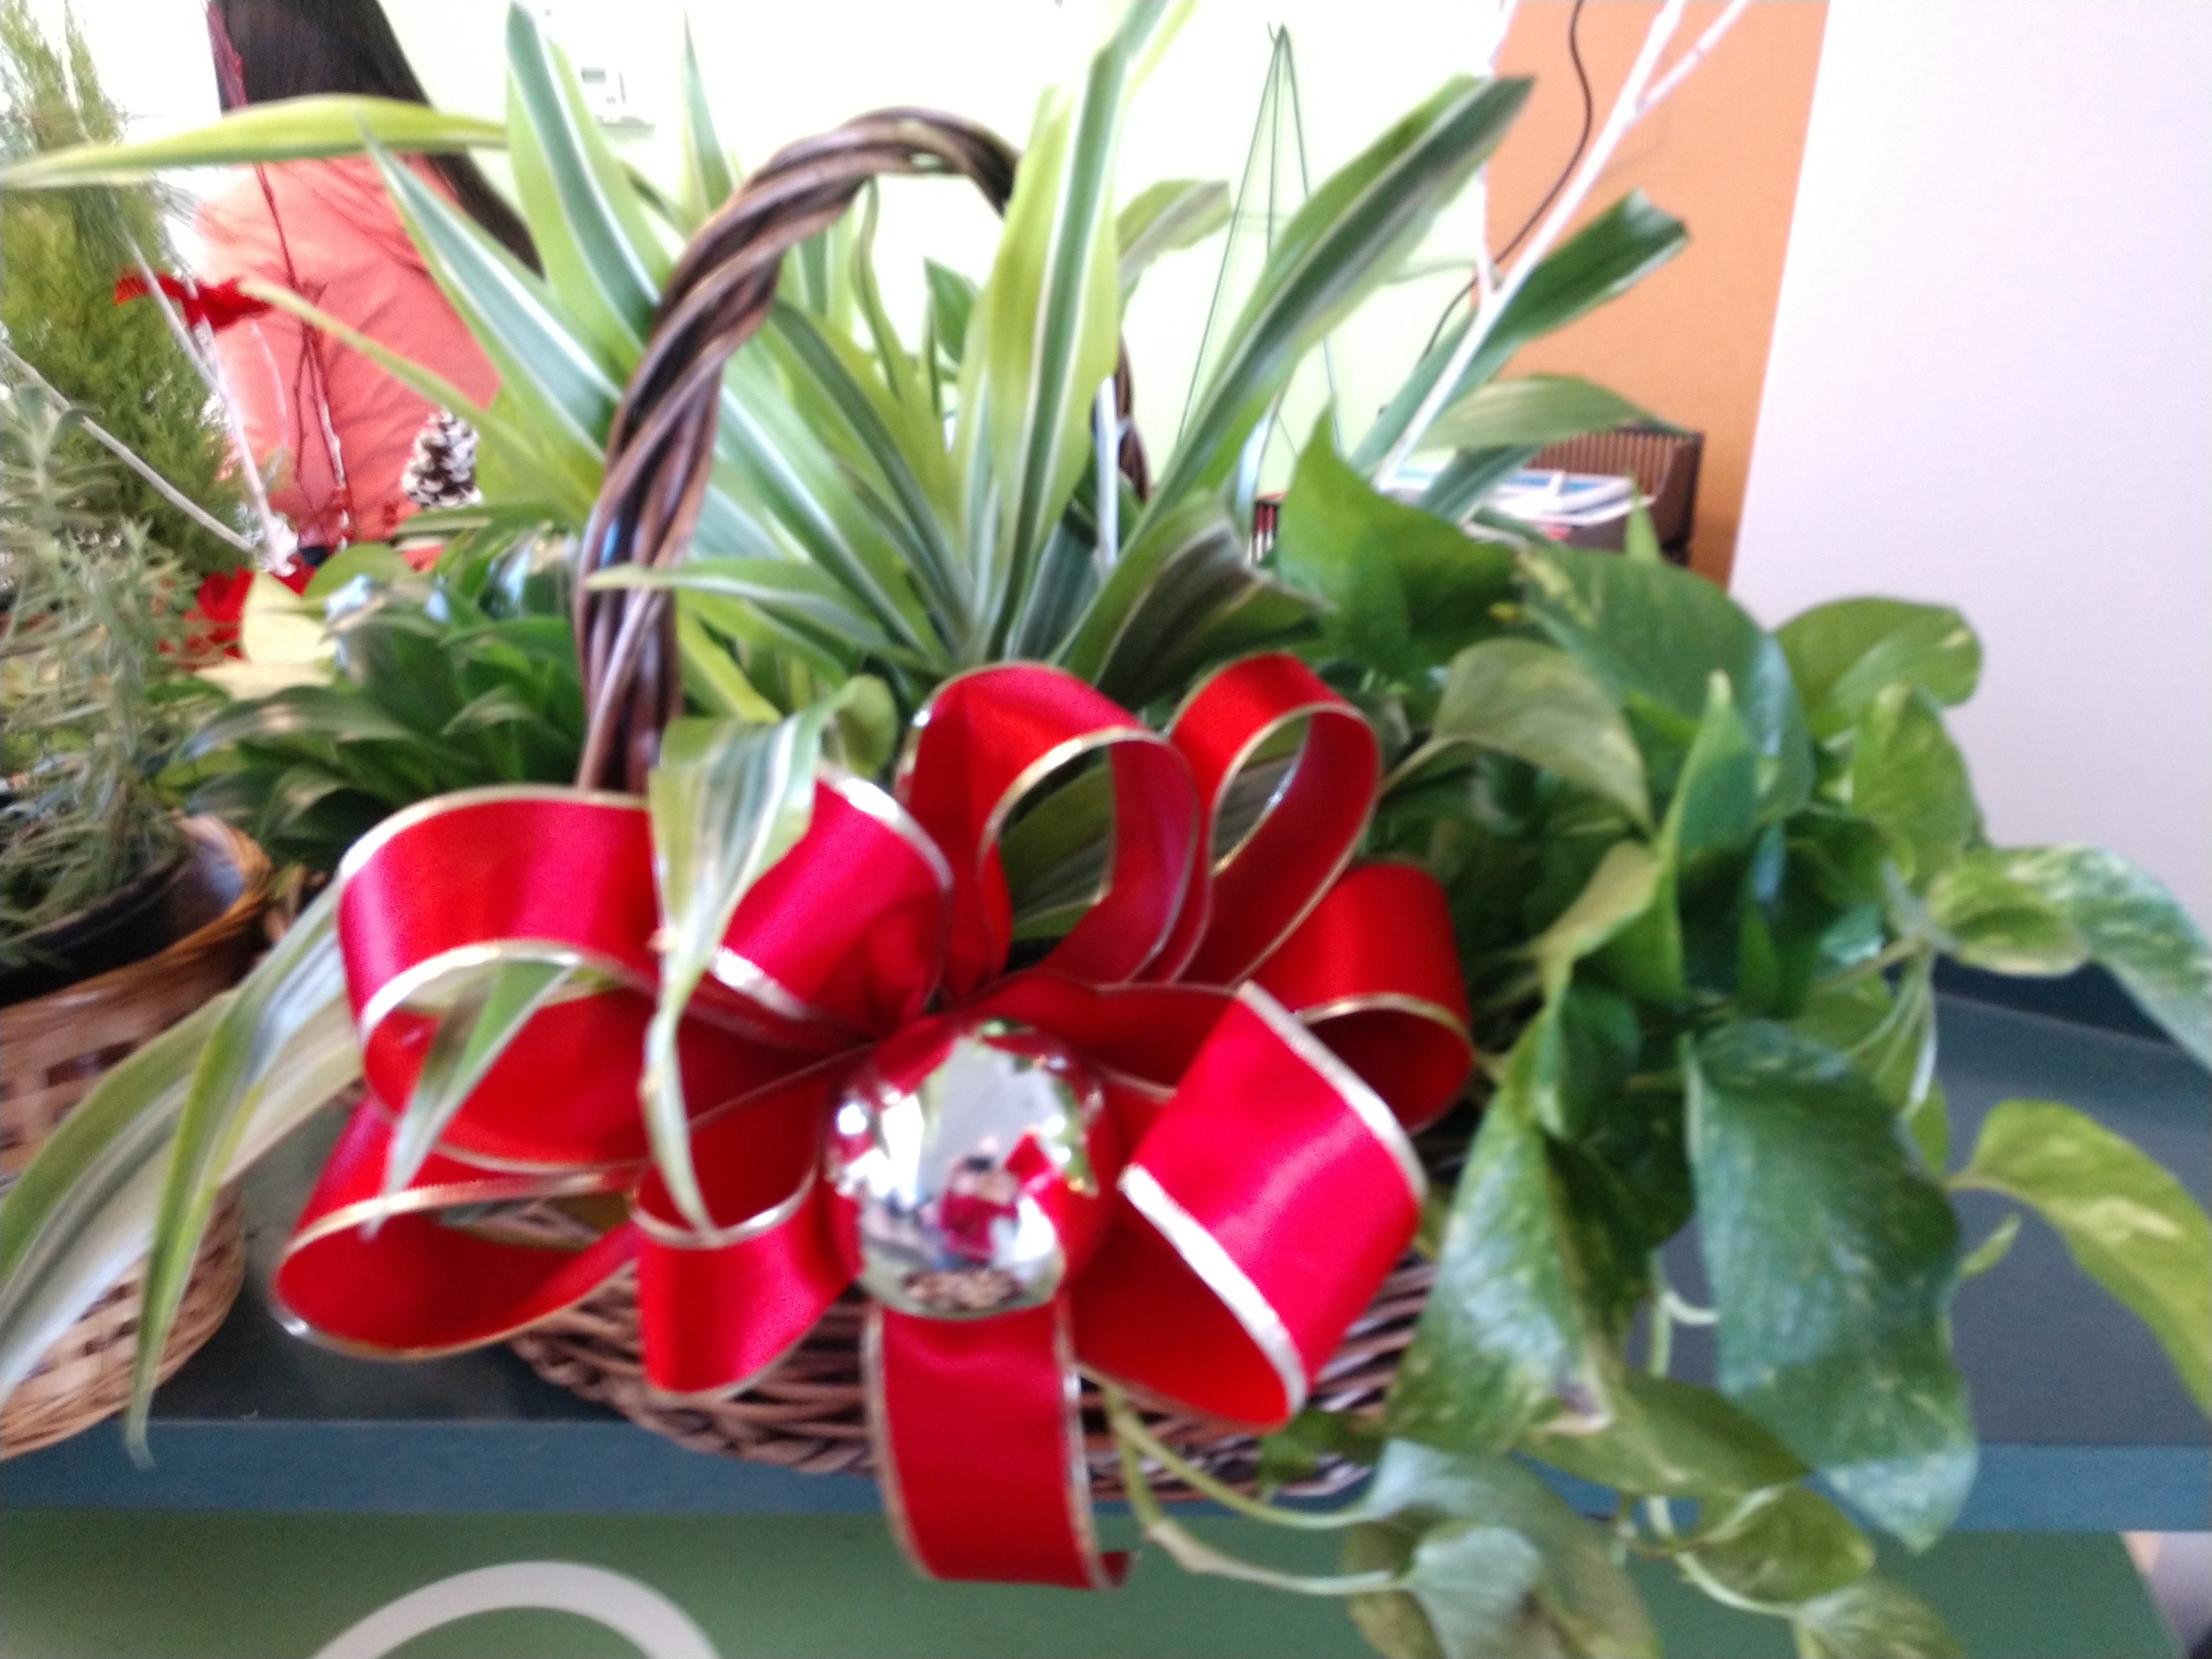 CCGA Resources & NeighborSpace Special Holiday Gathering & Plant Sale